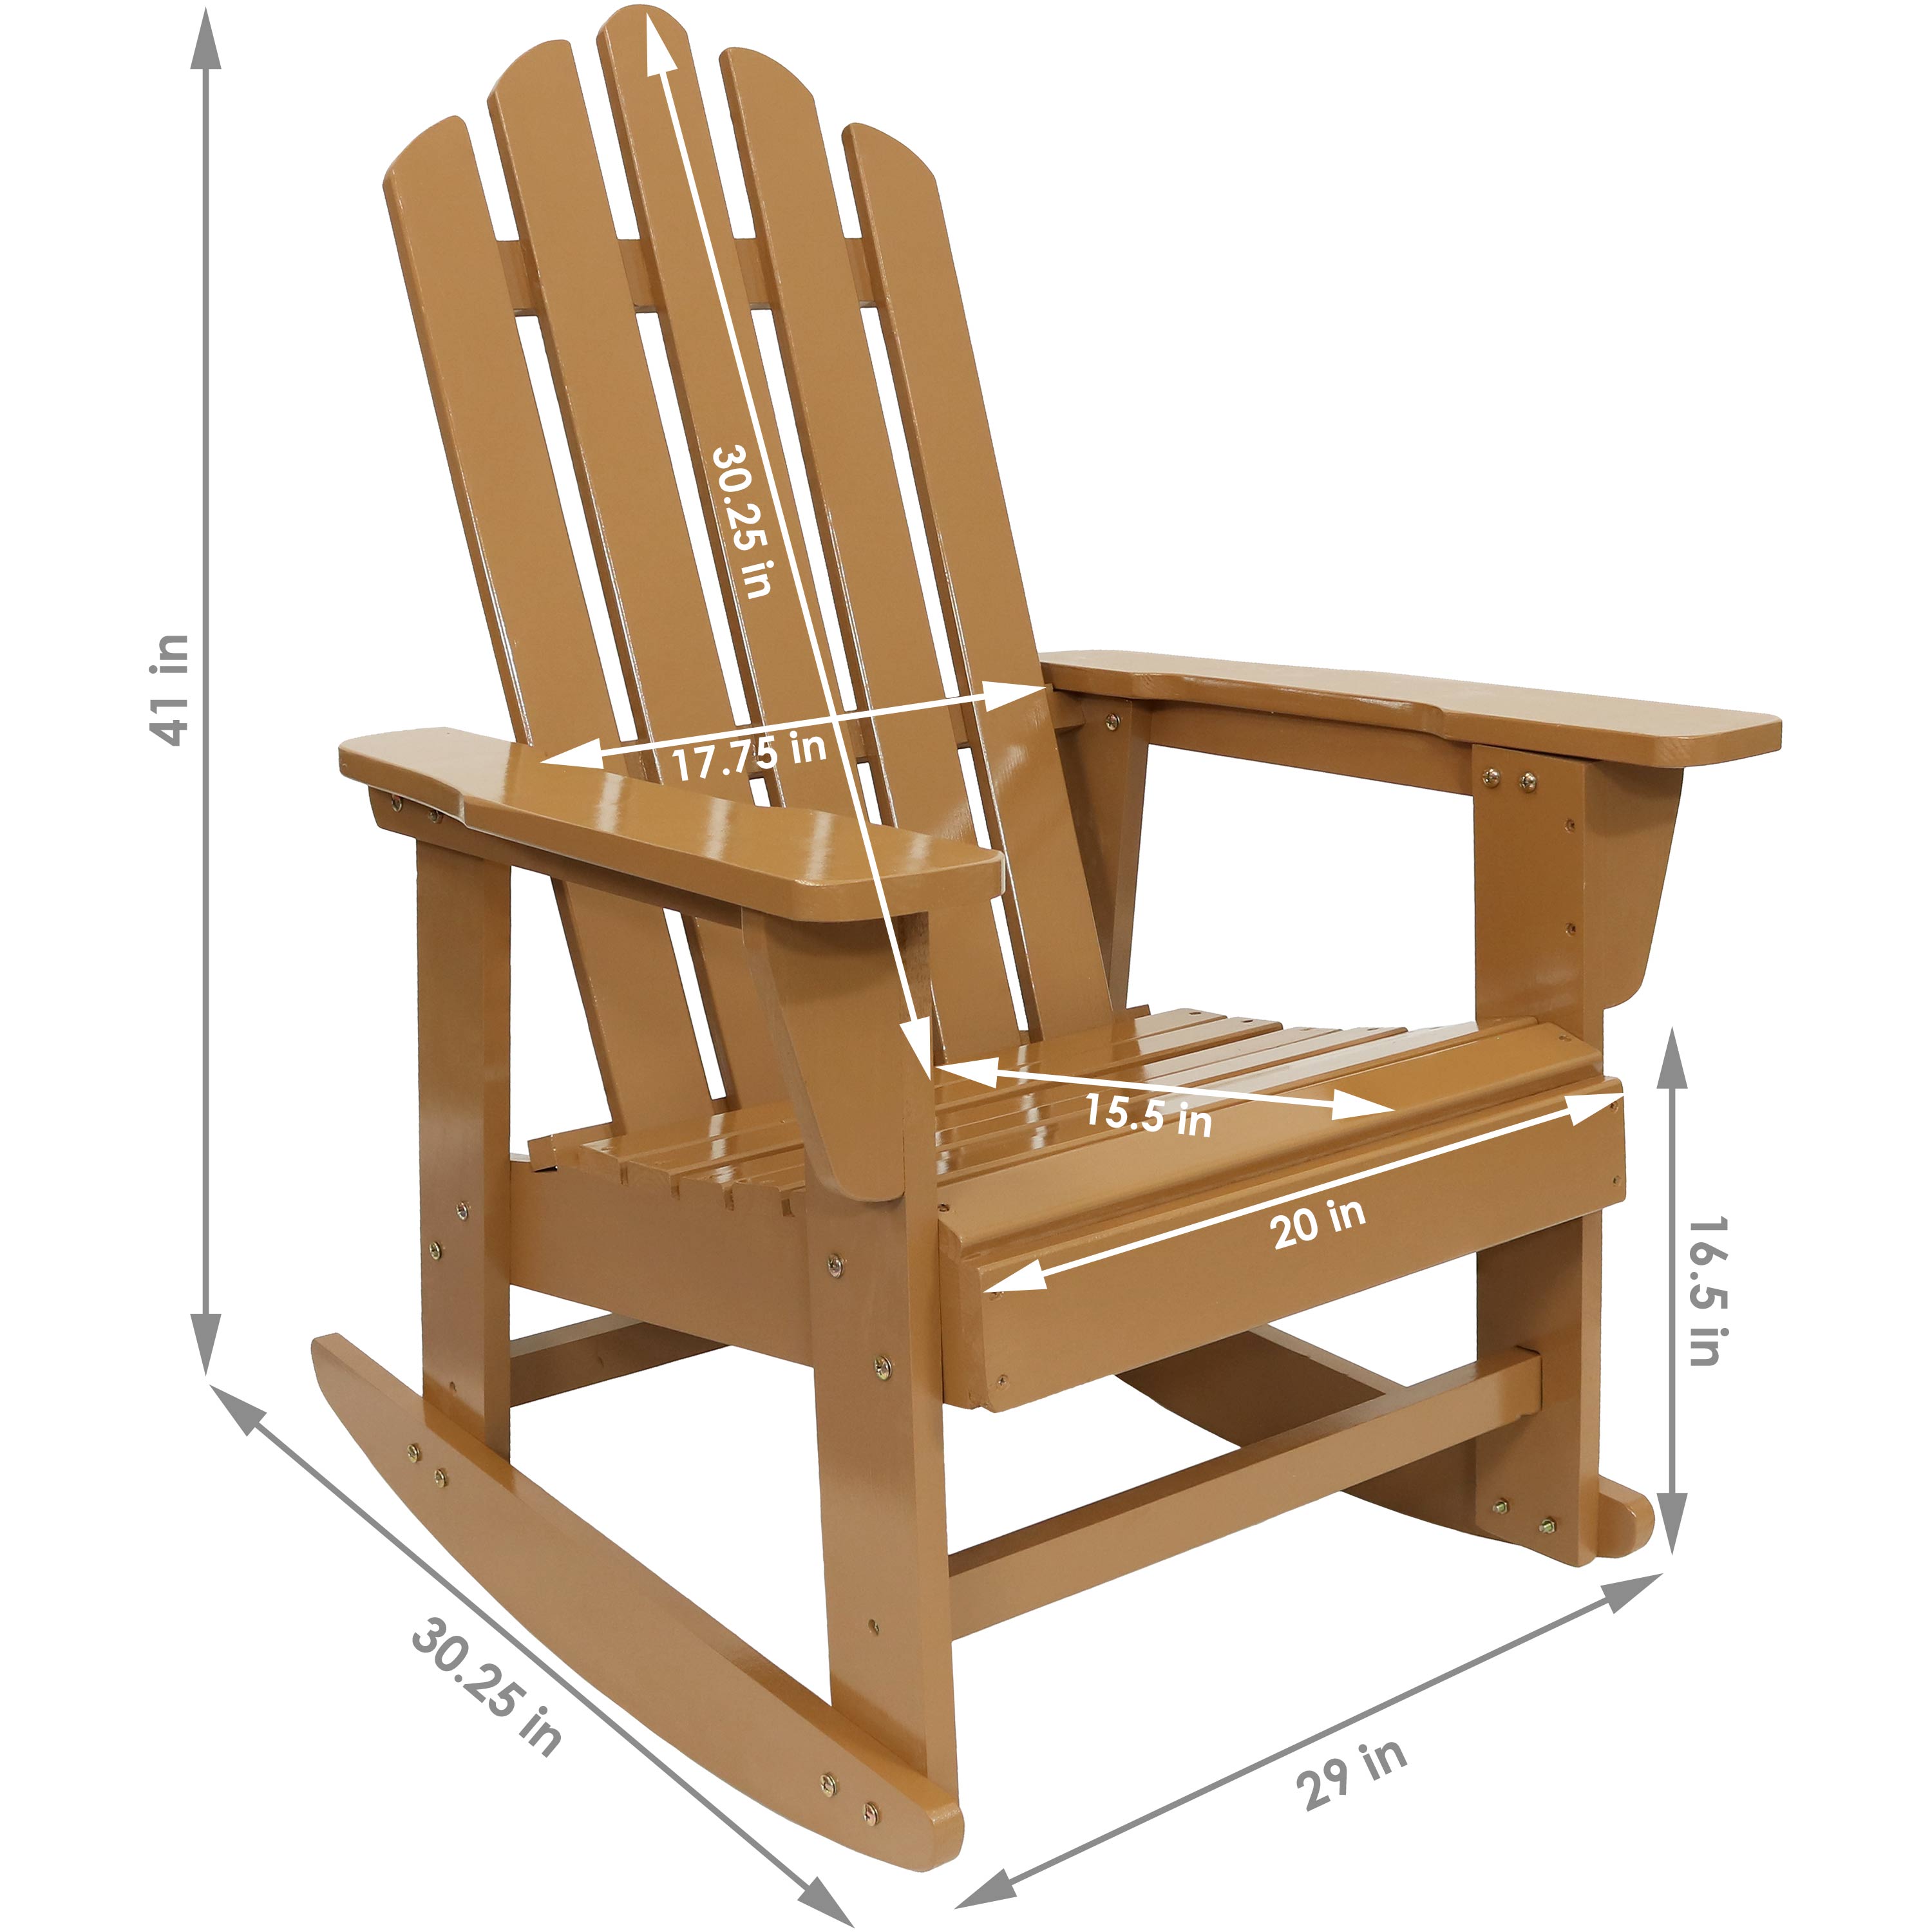 Sunnydaze Outdoor Wooden Adirondack Rocking Chair with Cedar Finish - Set of 2 - image 3 of 8